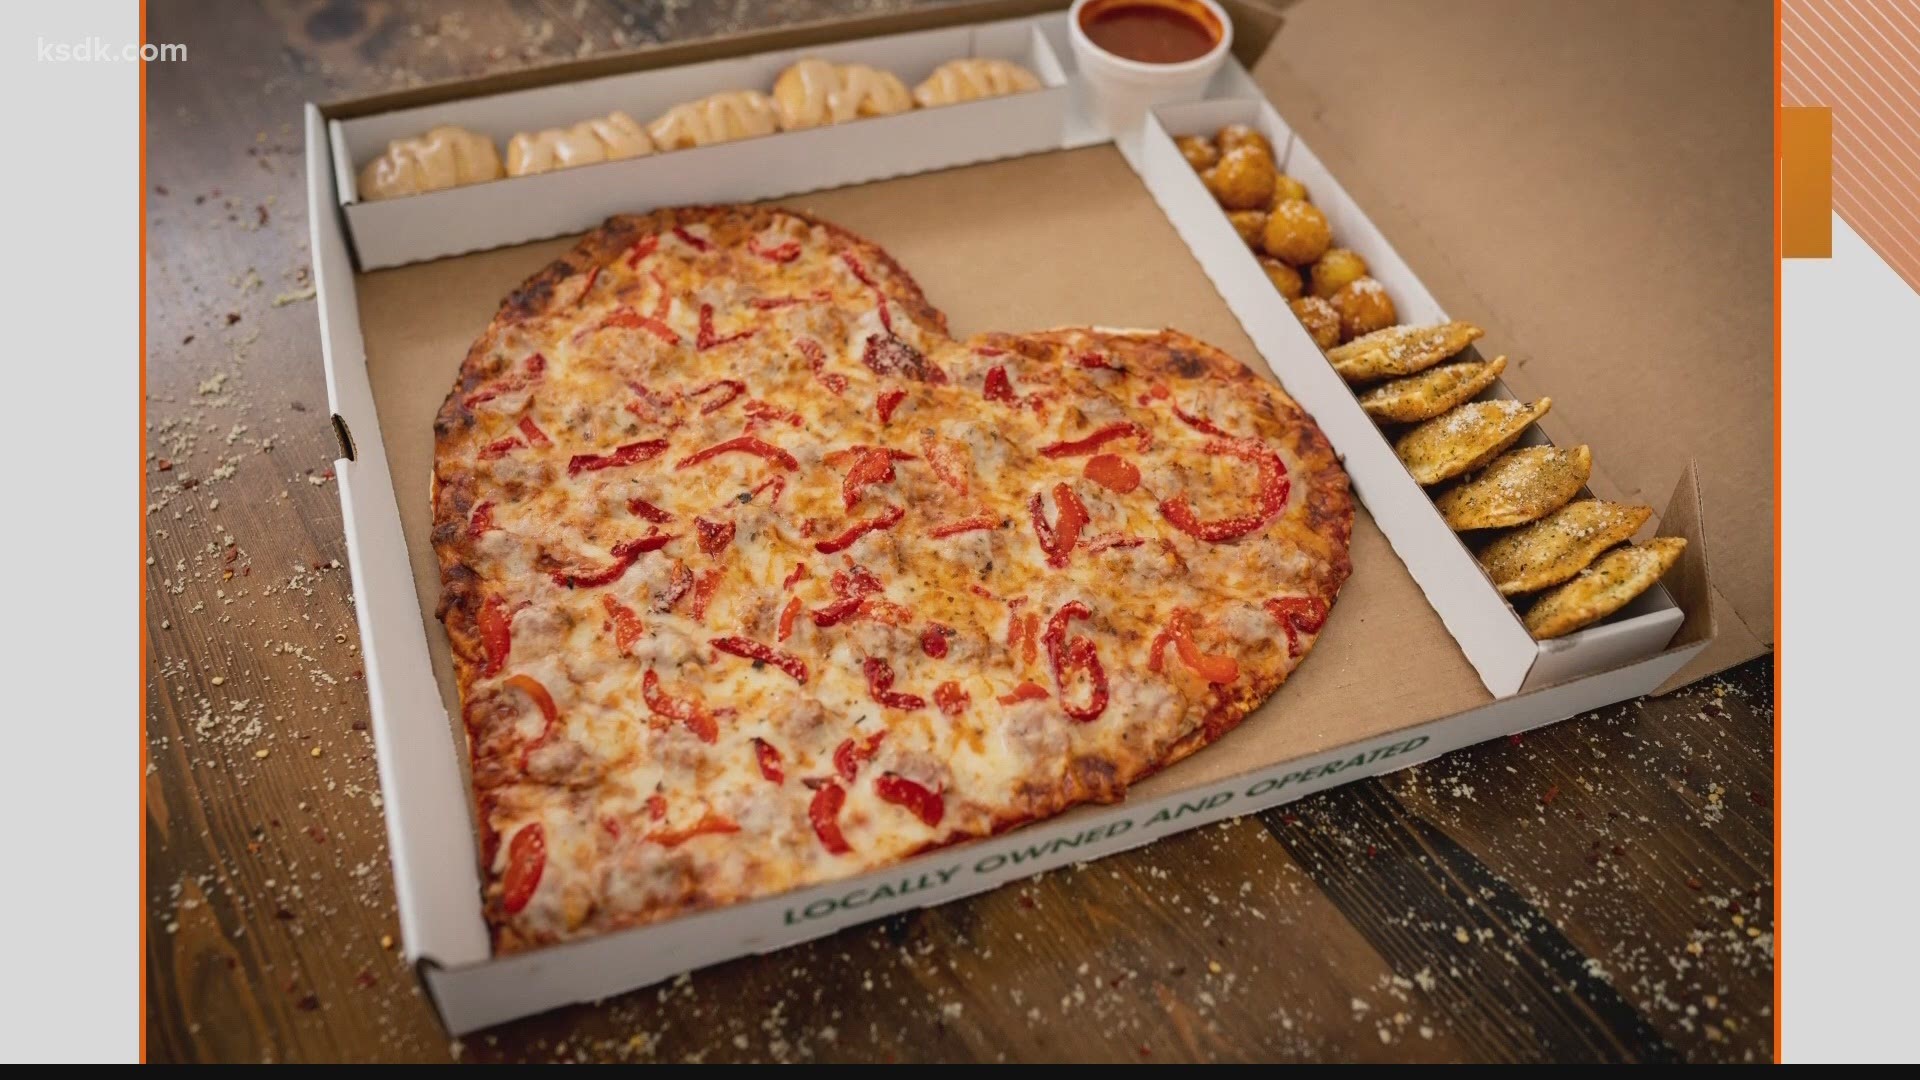 Imo’s is making Valentine’s Day dinner easy with their heart shaped pizzas and specials.